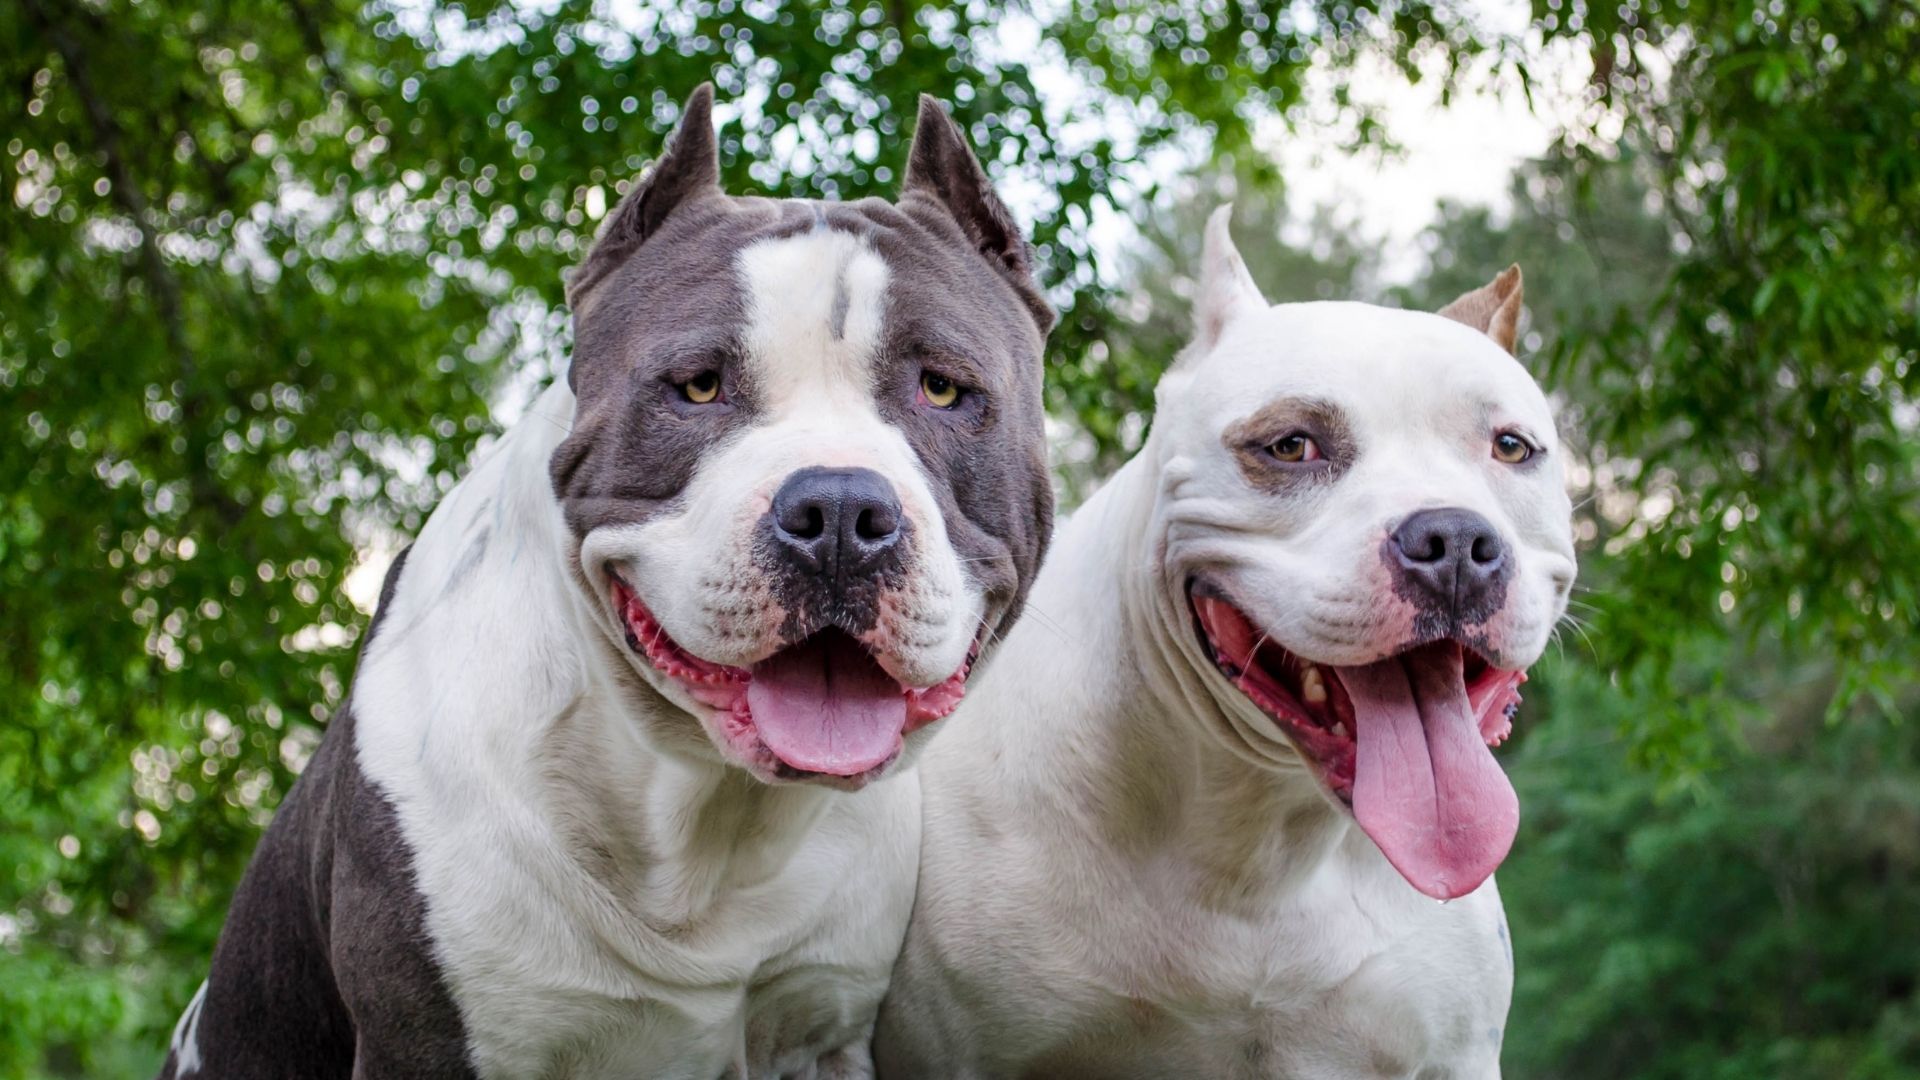 do pit bulls bite more than other dogs